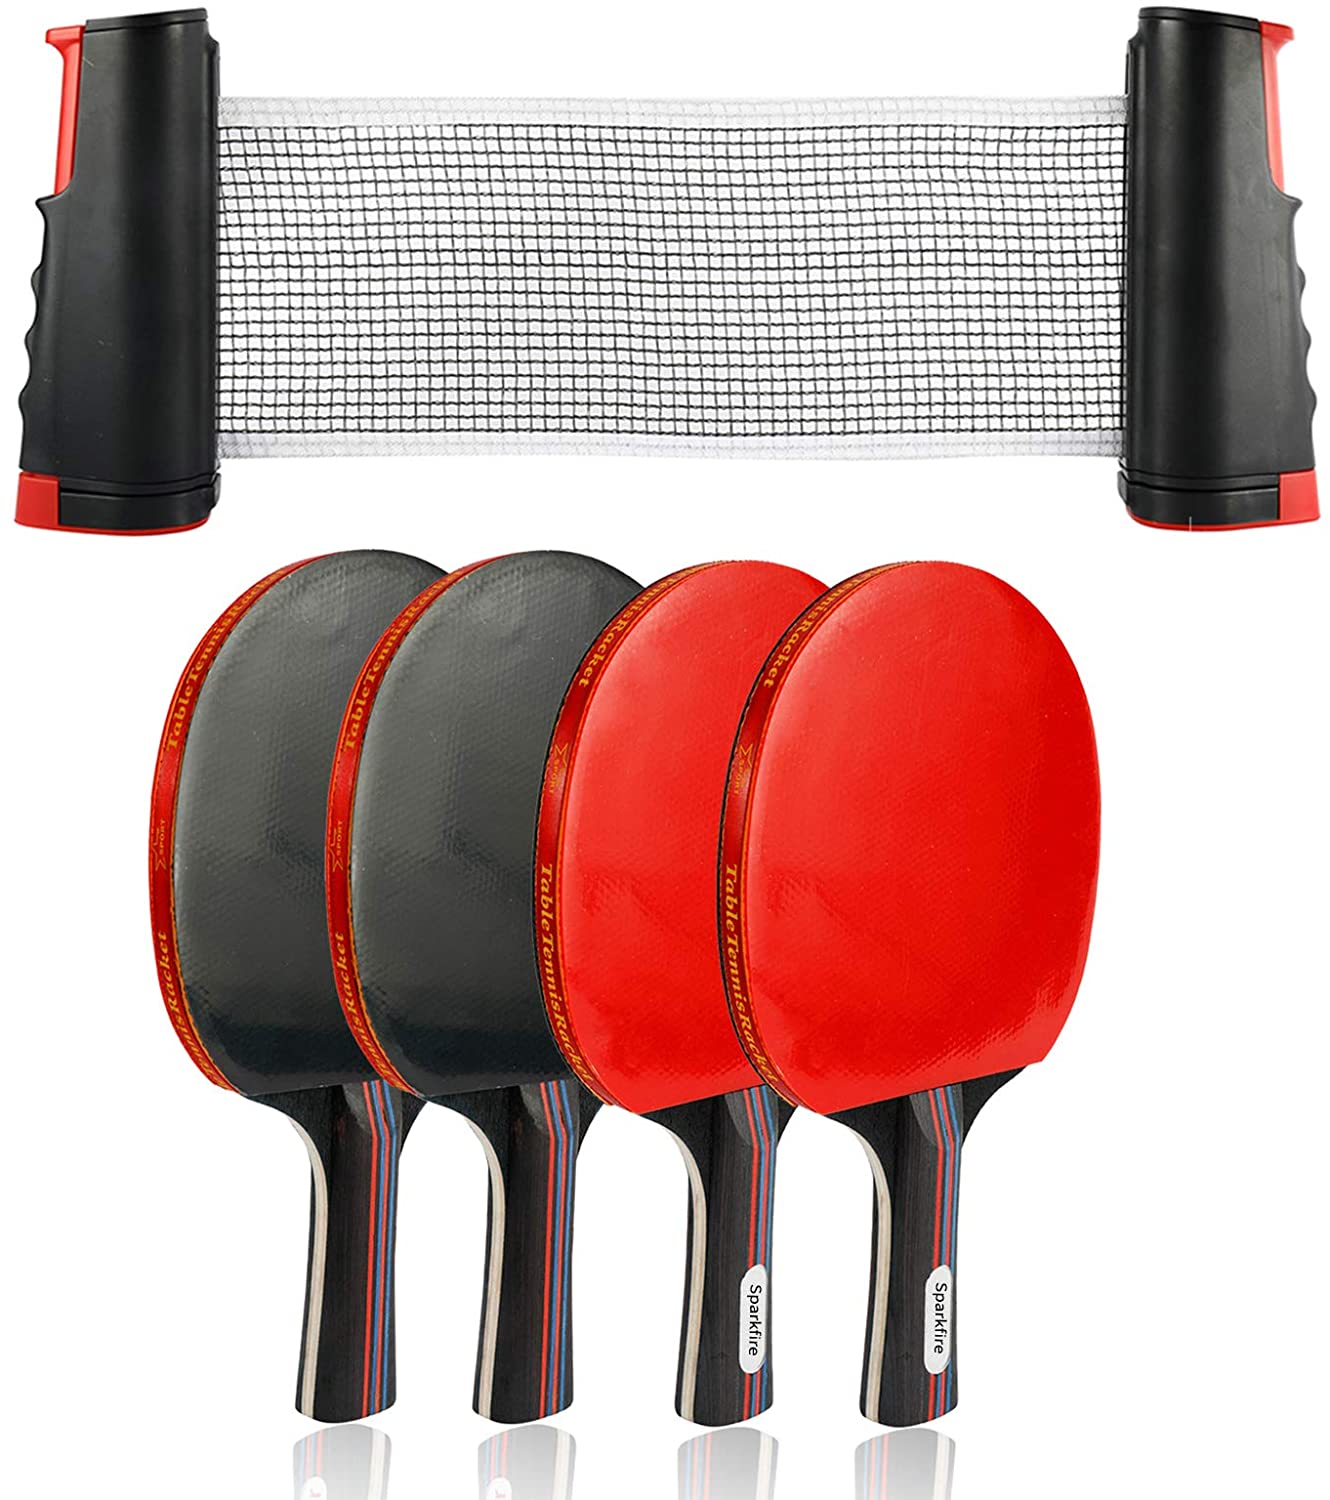 SET DE PING PONG POSTE/RED RUNIC - Deportes Jimmy